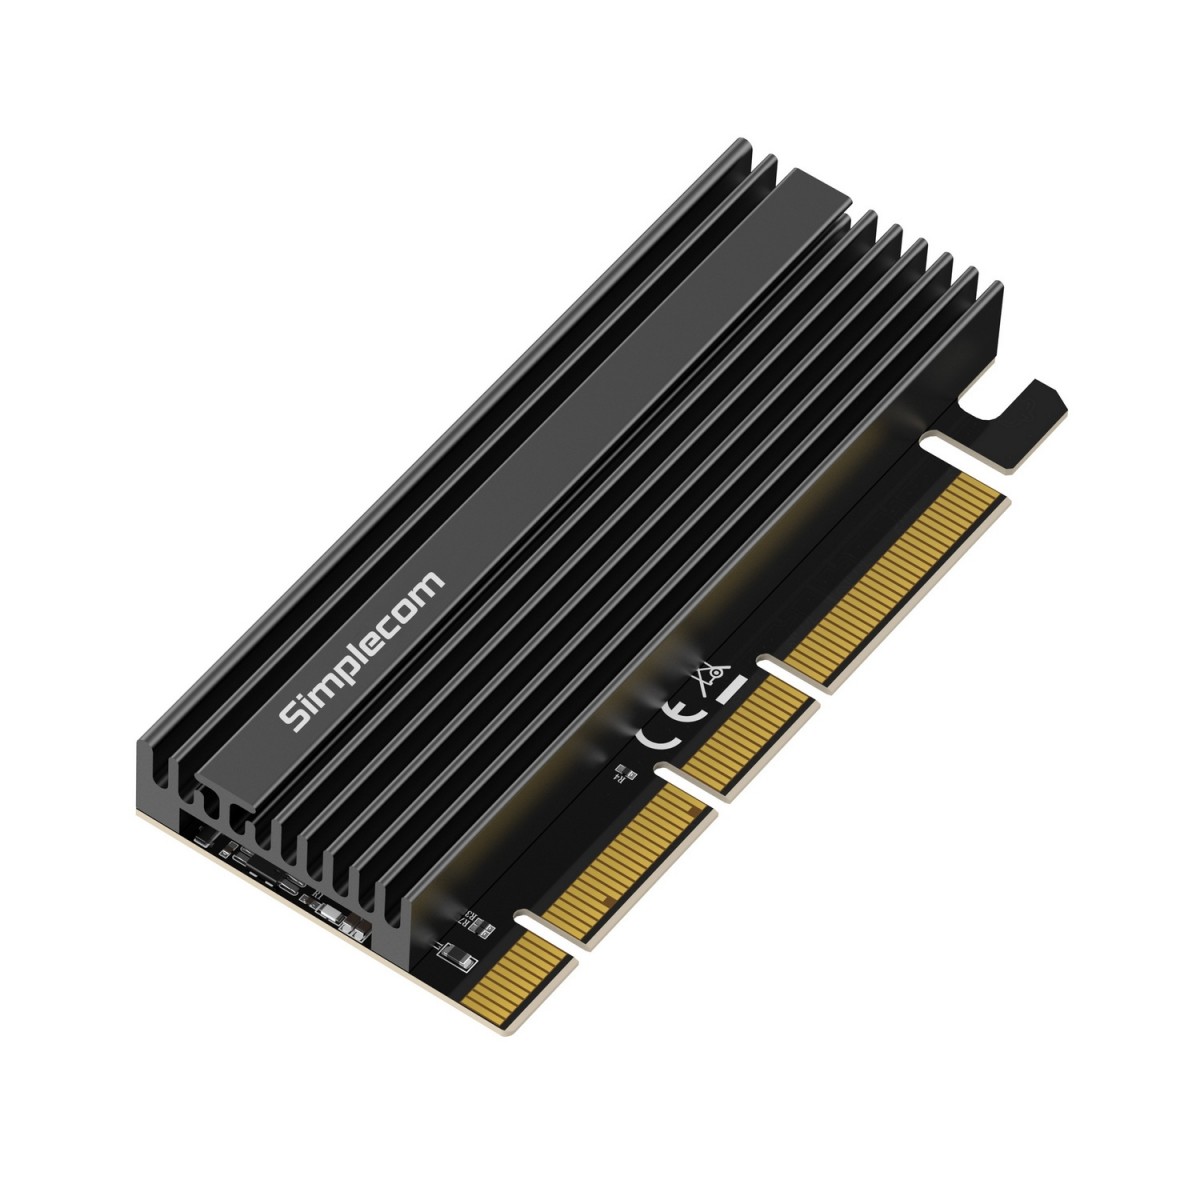  NVMe M.2 SSD to PCIe x4 x8 x16 Expansion Card with Aluminium Heat Sink Black  